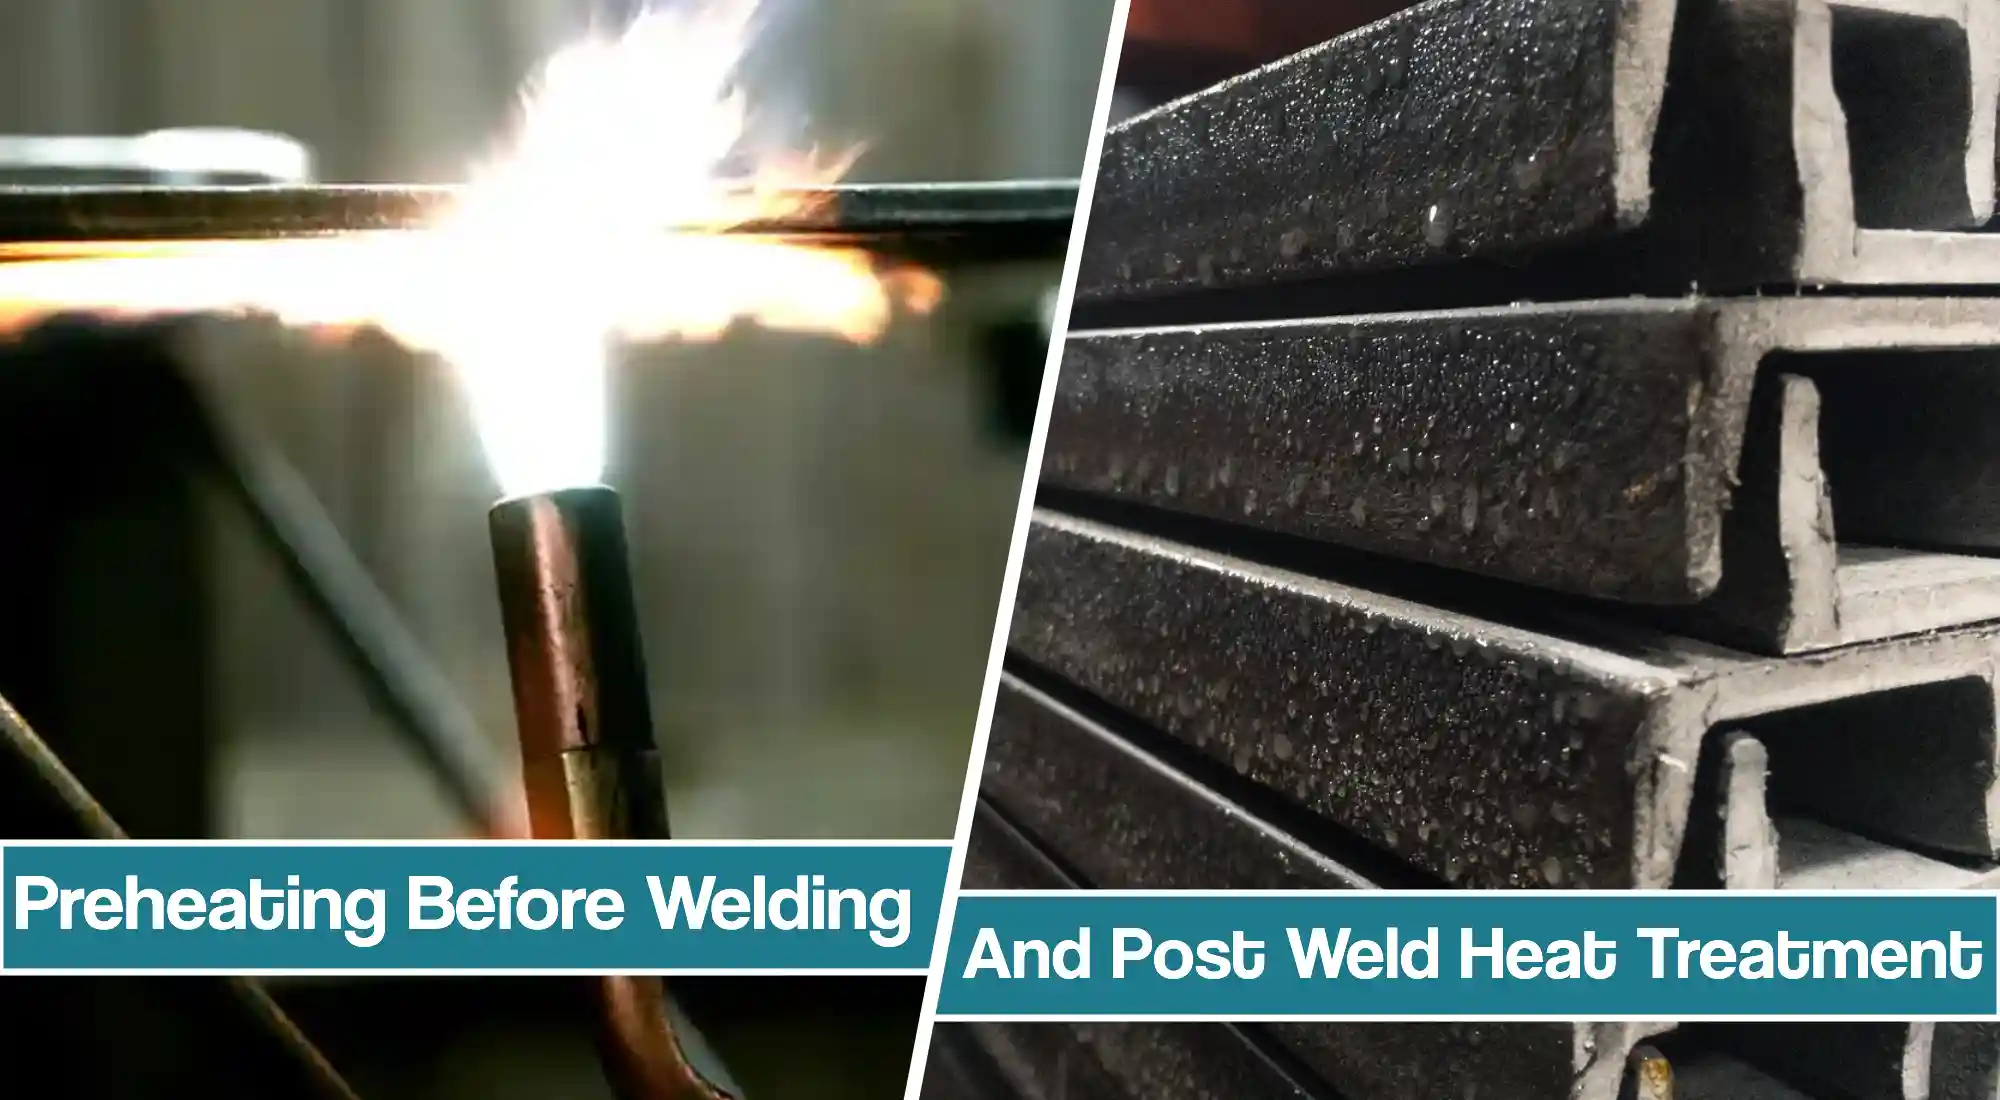 Preheating In welding And Post Welding Heat Treatment – Steel, Stainless, and Aluminum